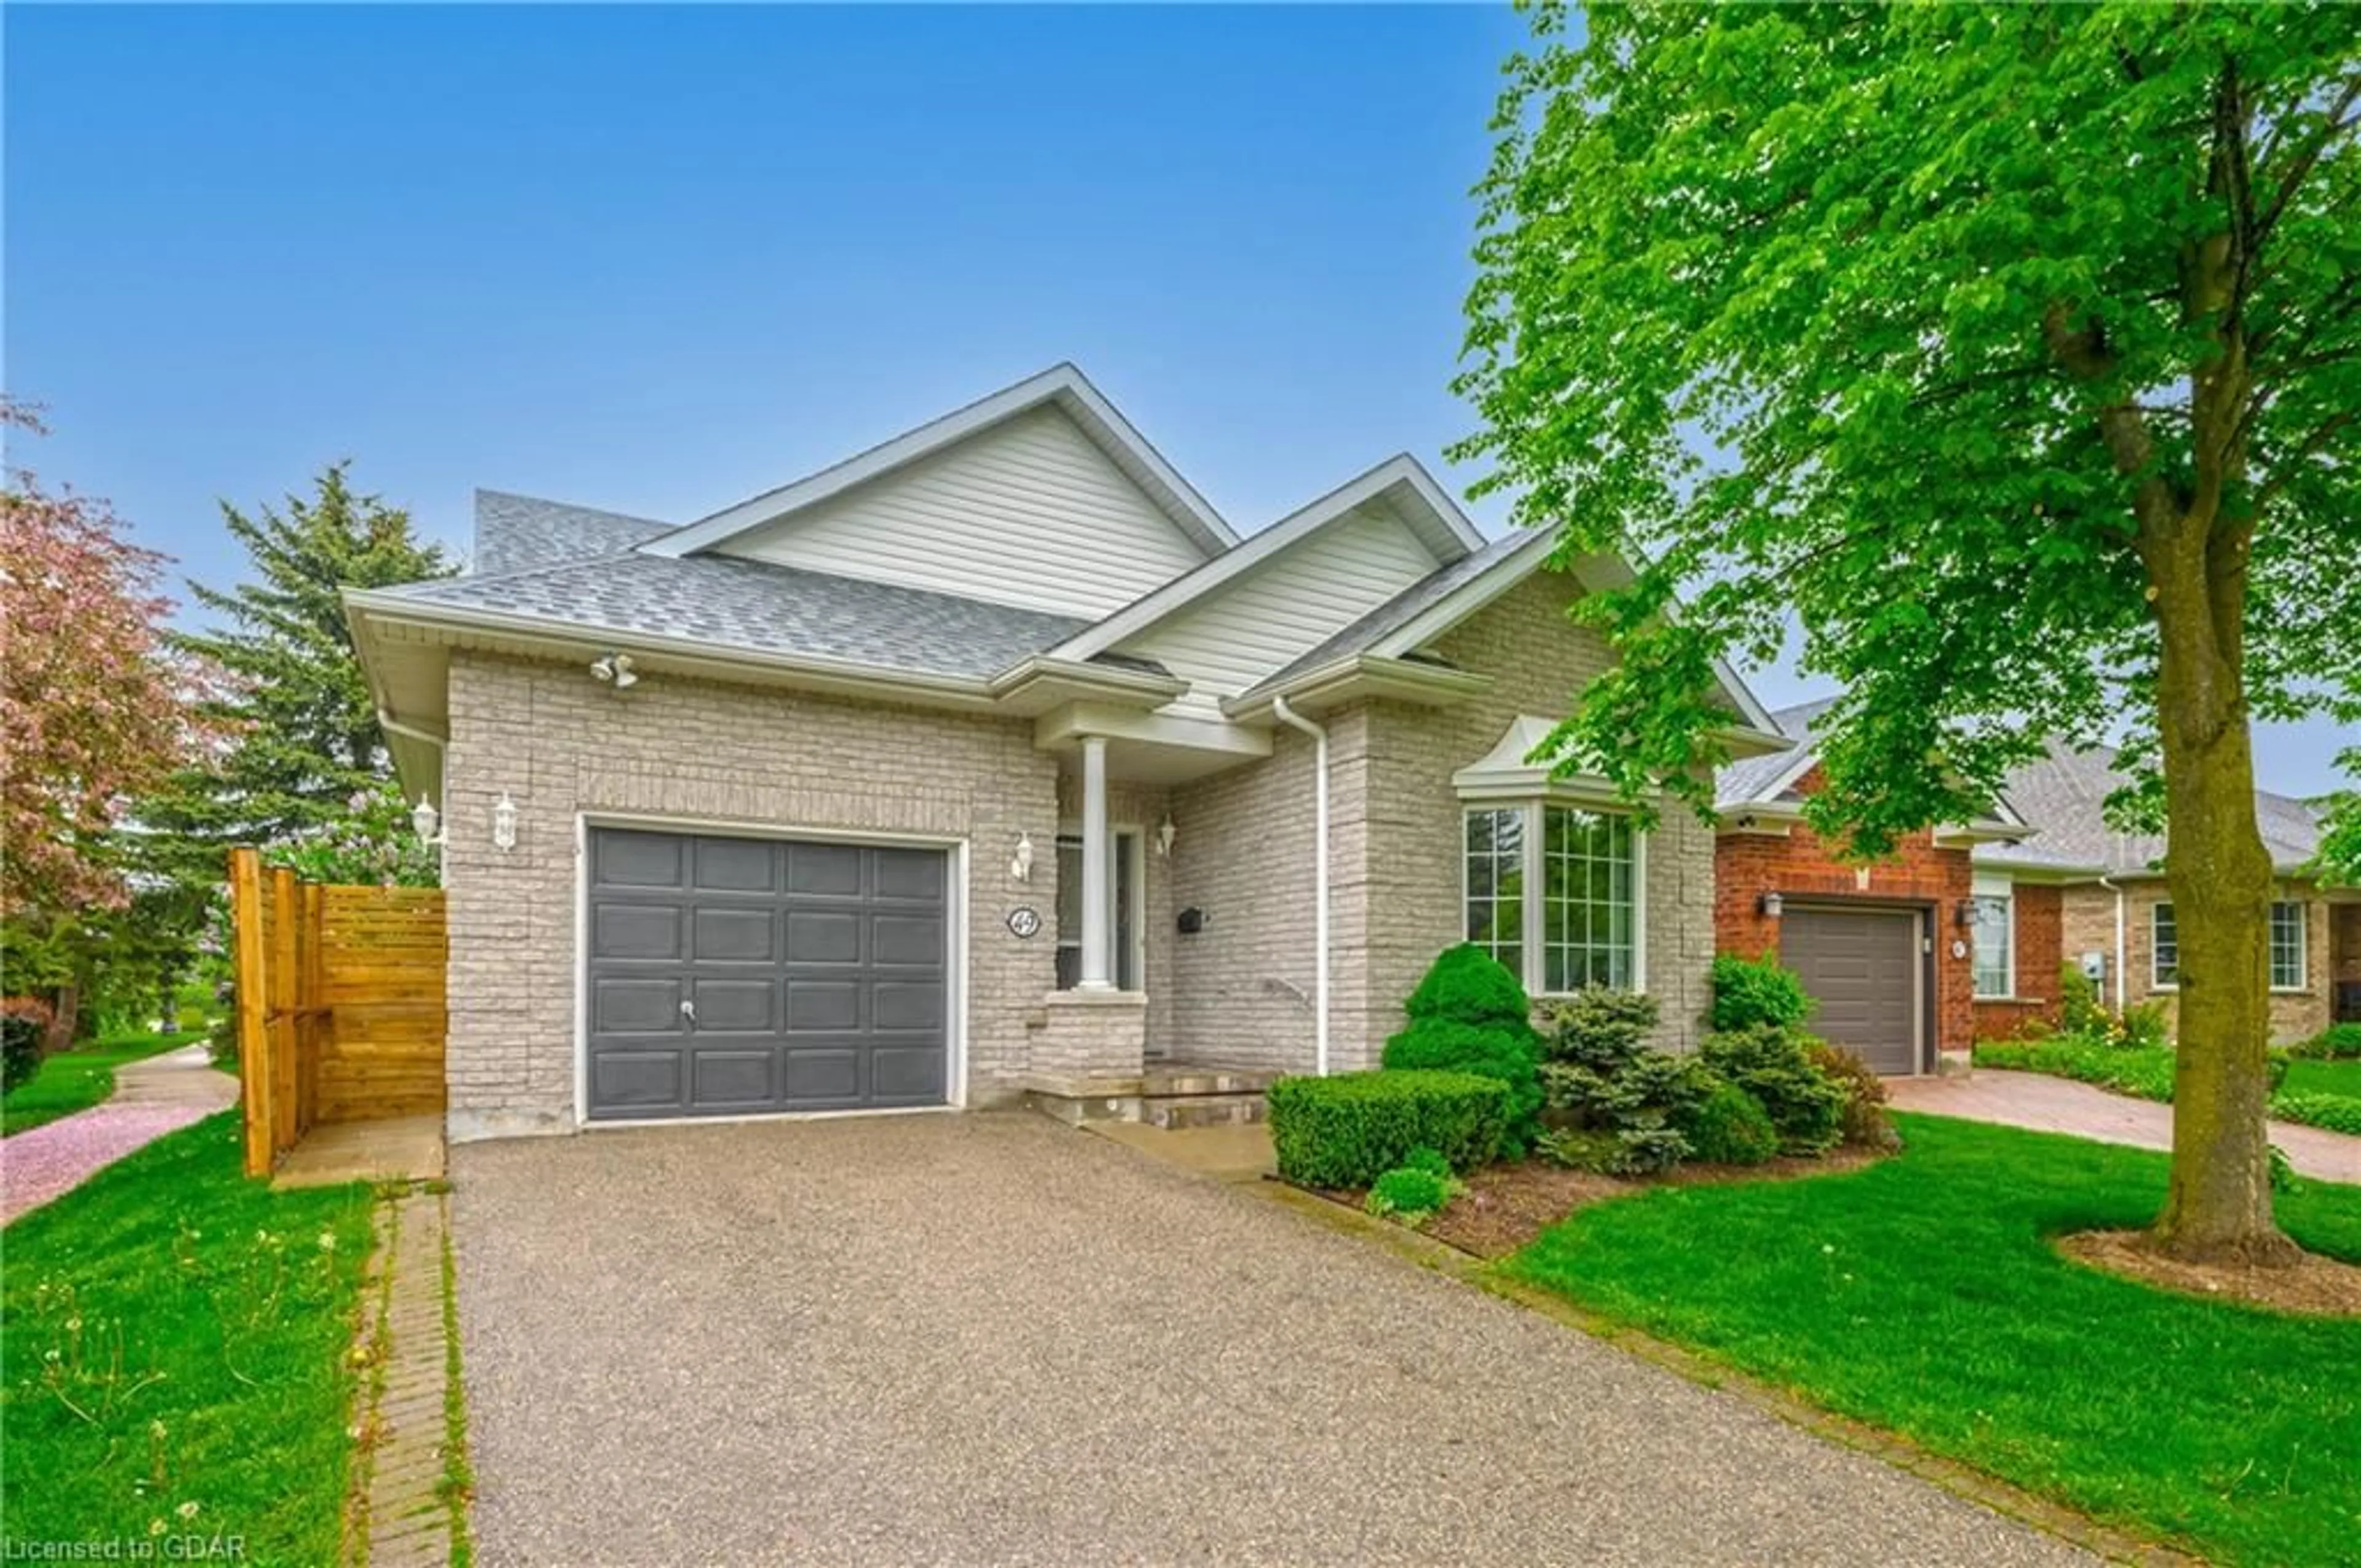 Home with brick exterior material for 49 Cherry Blossom Cir, Guelph Ontario N1G 4X7